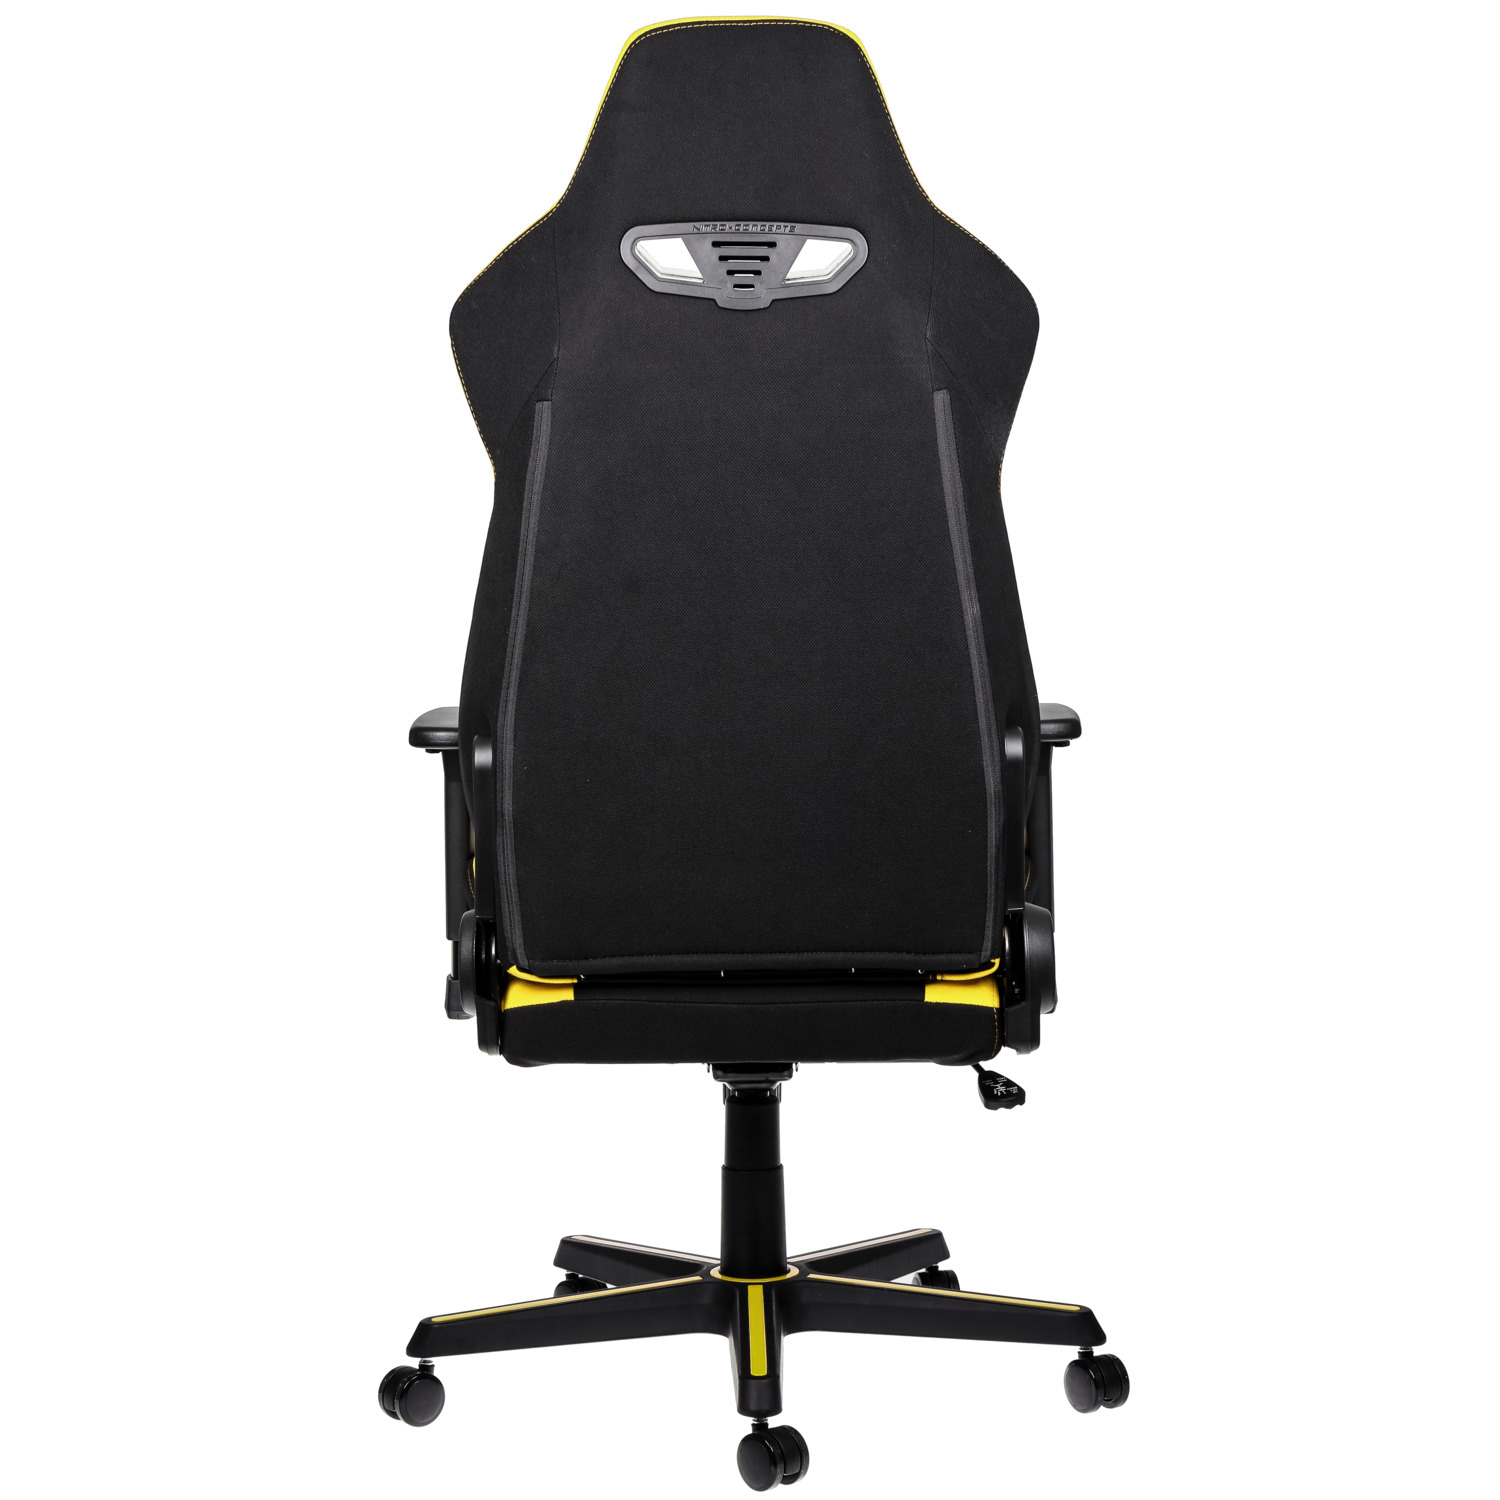 nitro-concepts - S300 Gaming Chair Astral Yellow